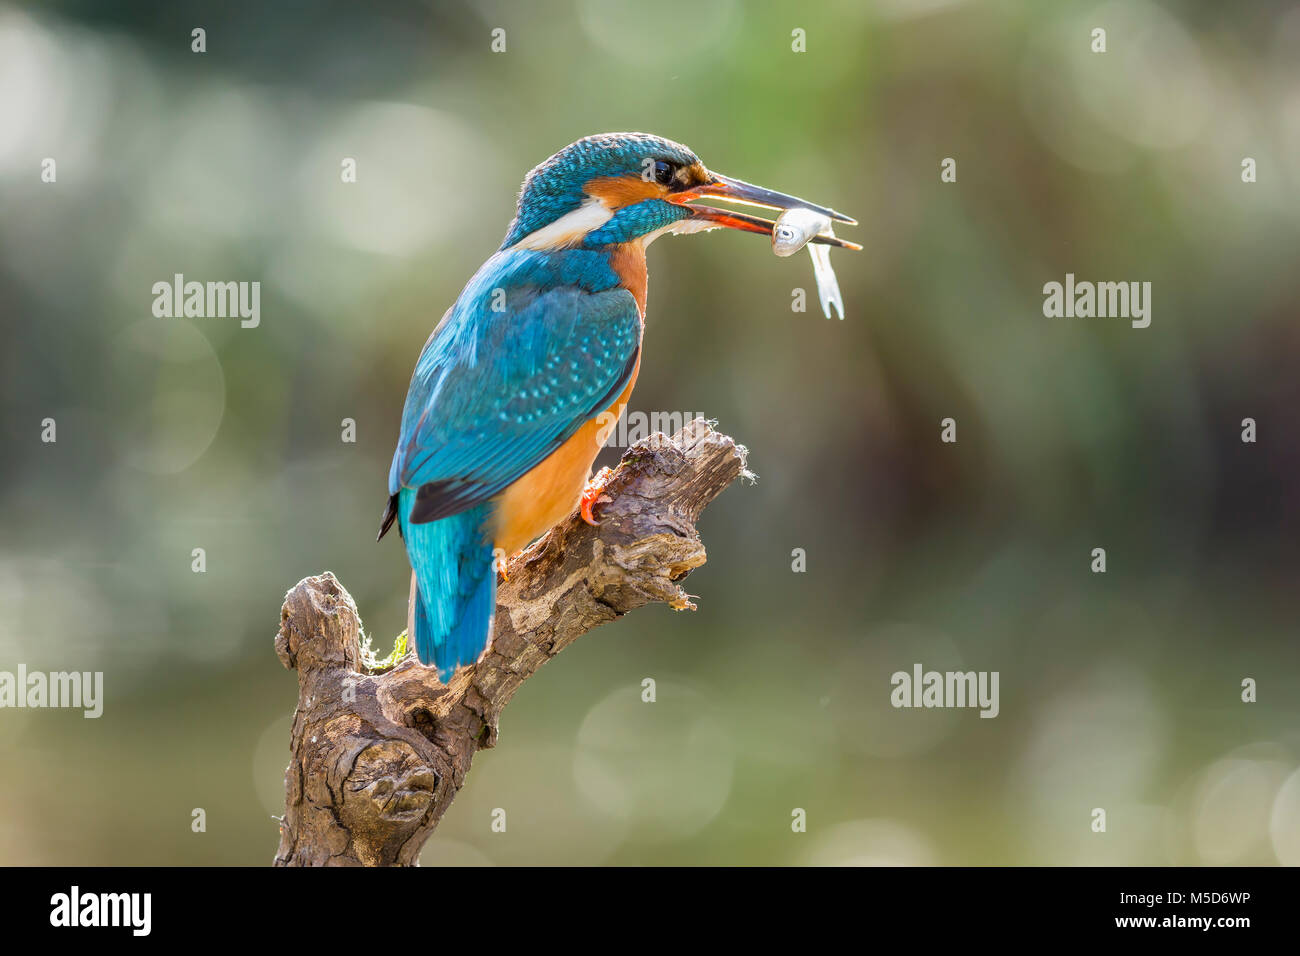 Common kingfisher (Alcedo atthis) sits on branch with fish as prey, North Rhine-Westphalia, Germany Stock Photo